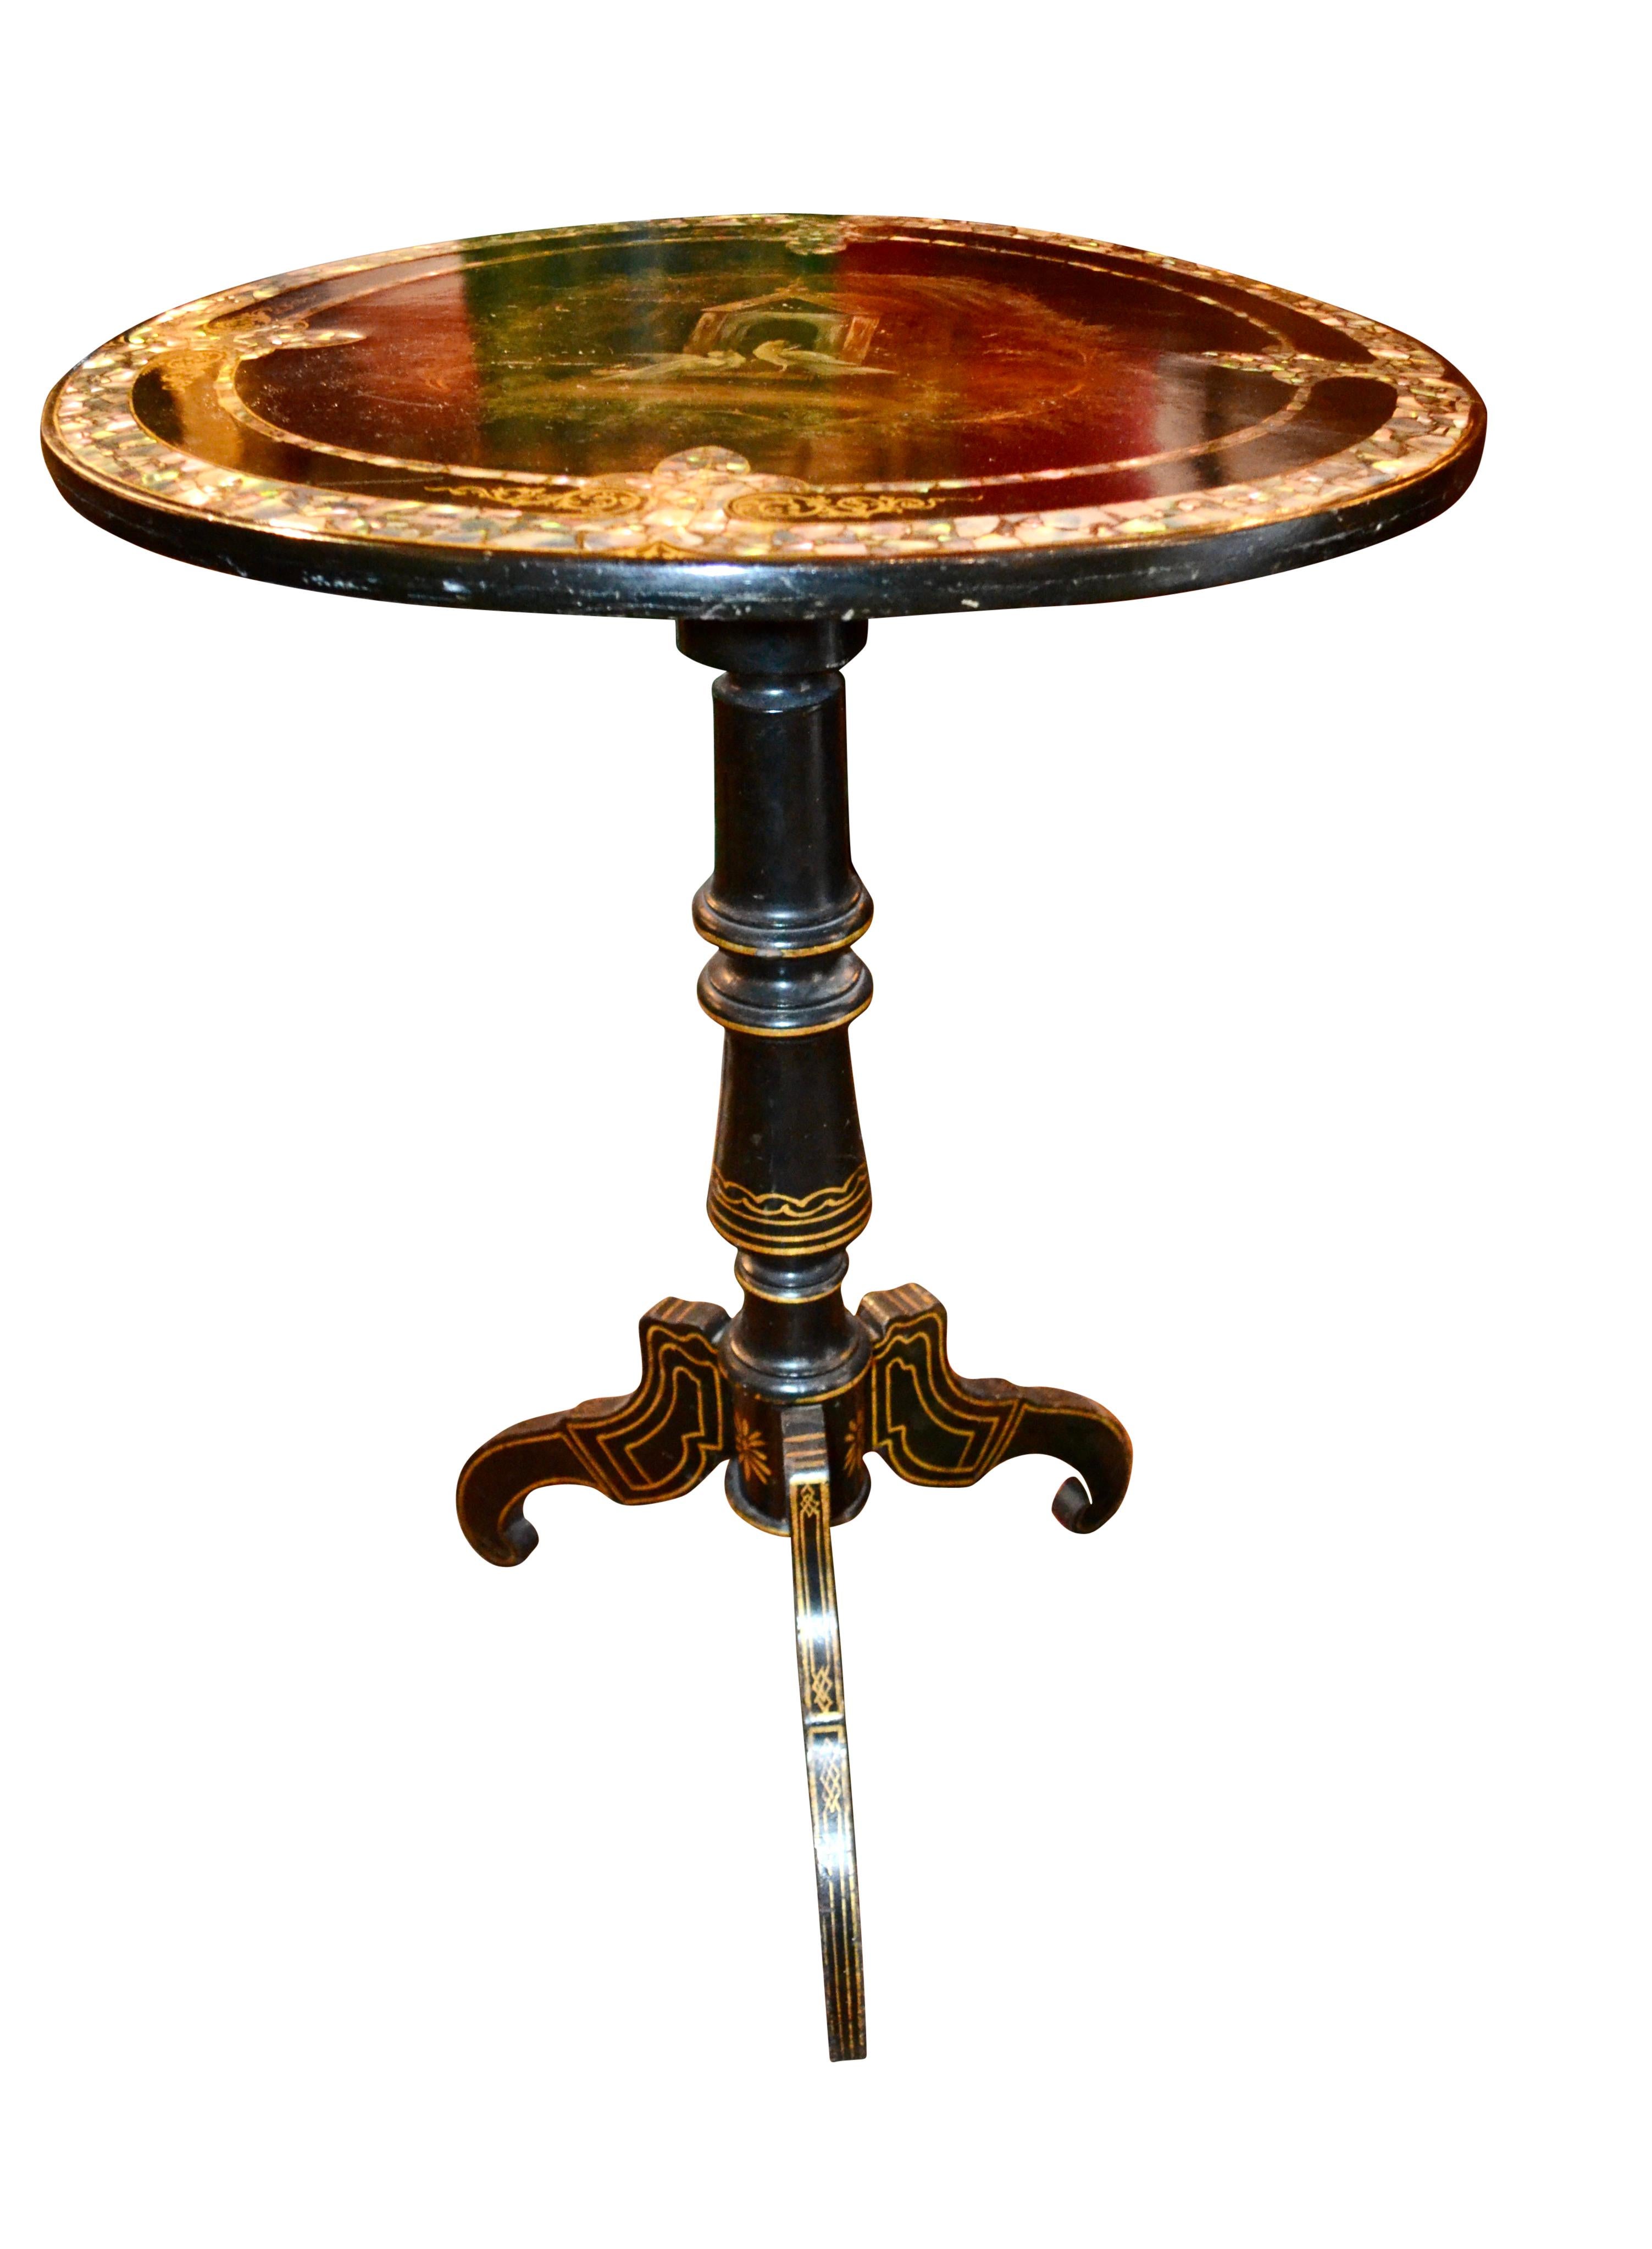 A circular ebonized wood and painted tilt-top occasional table; the top centred by a well painted vignette of two doves symbols of peace and love in front of their temple like birdhouse ; the top rests on a turned ebonized and gilt column on a